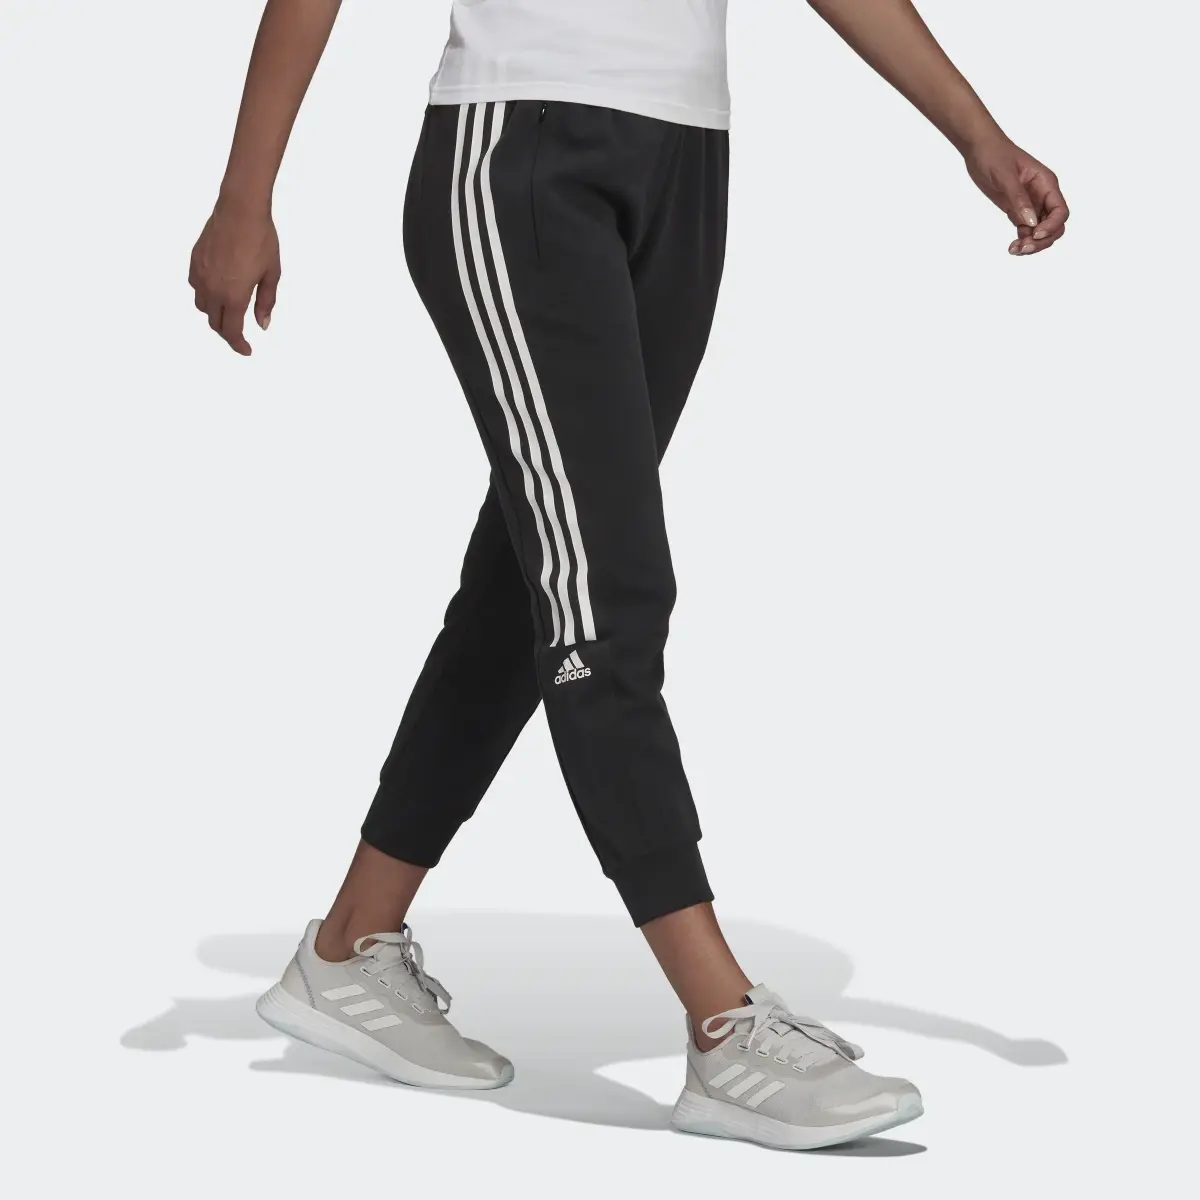 Adidas AEROREADY Made for Training Cotton-Touch Joggers. 3